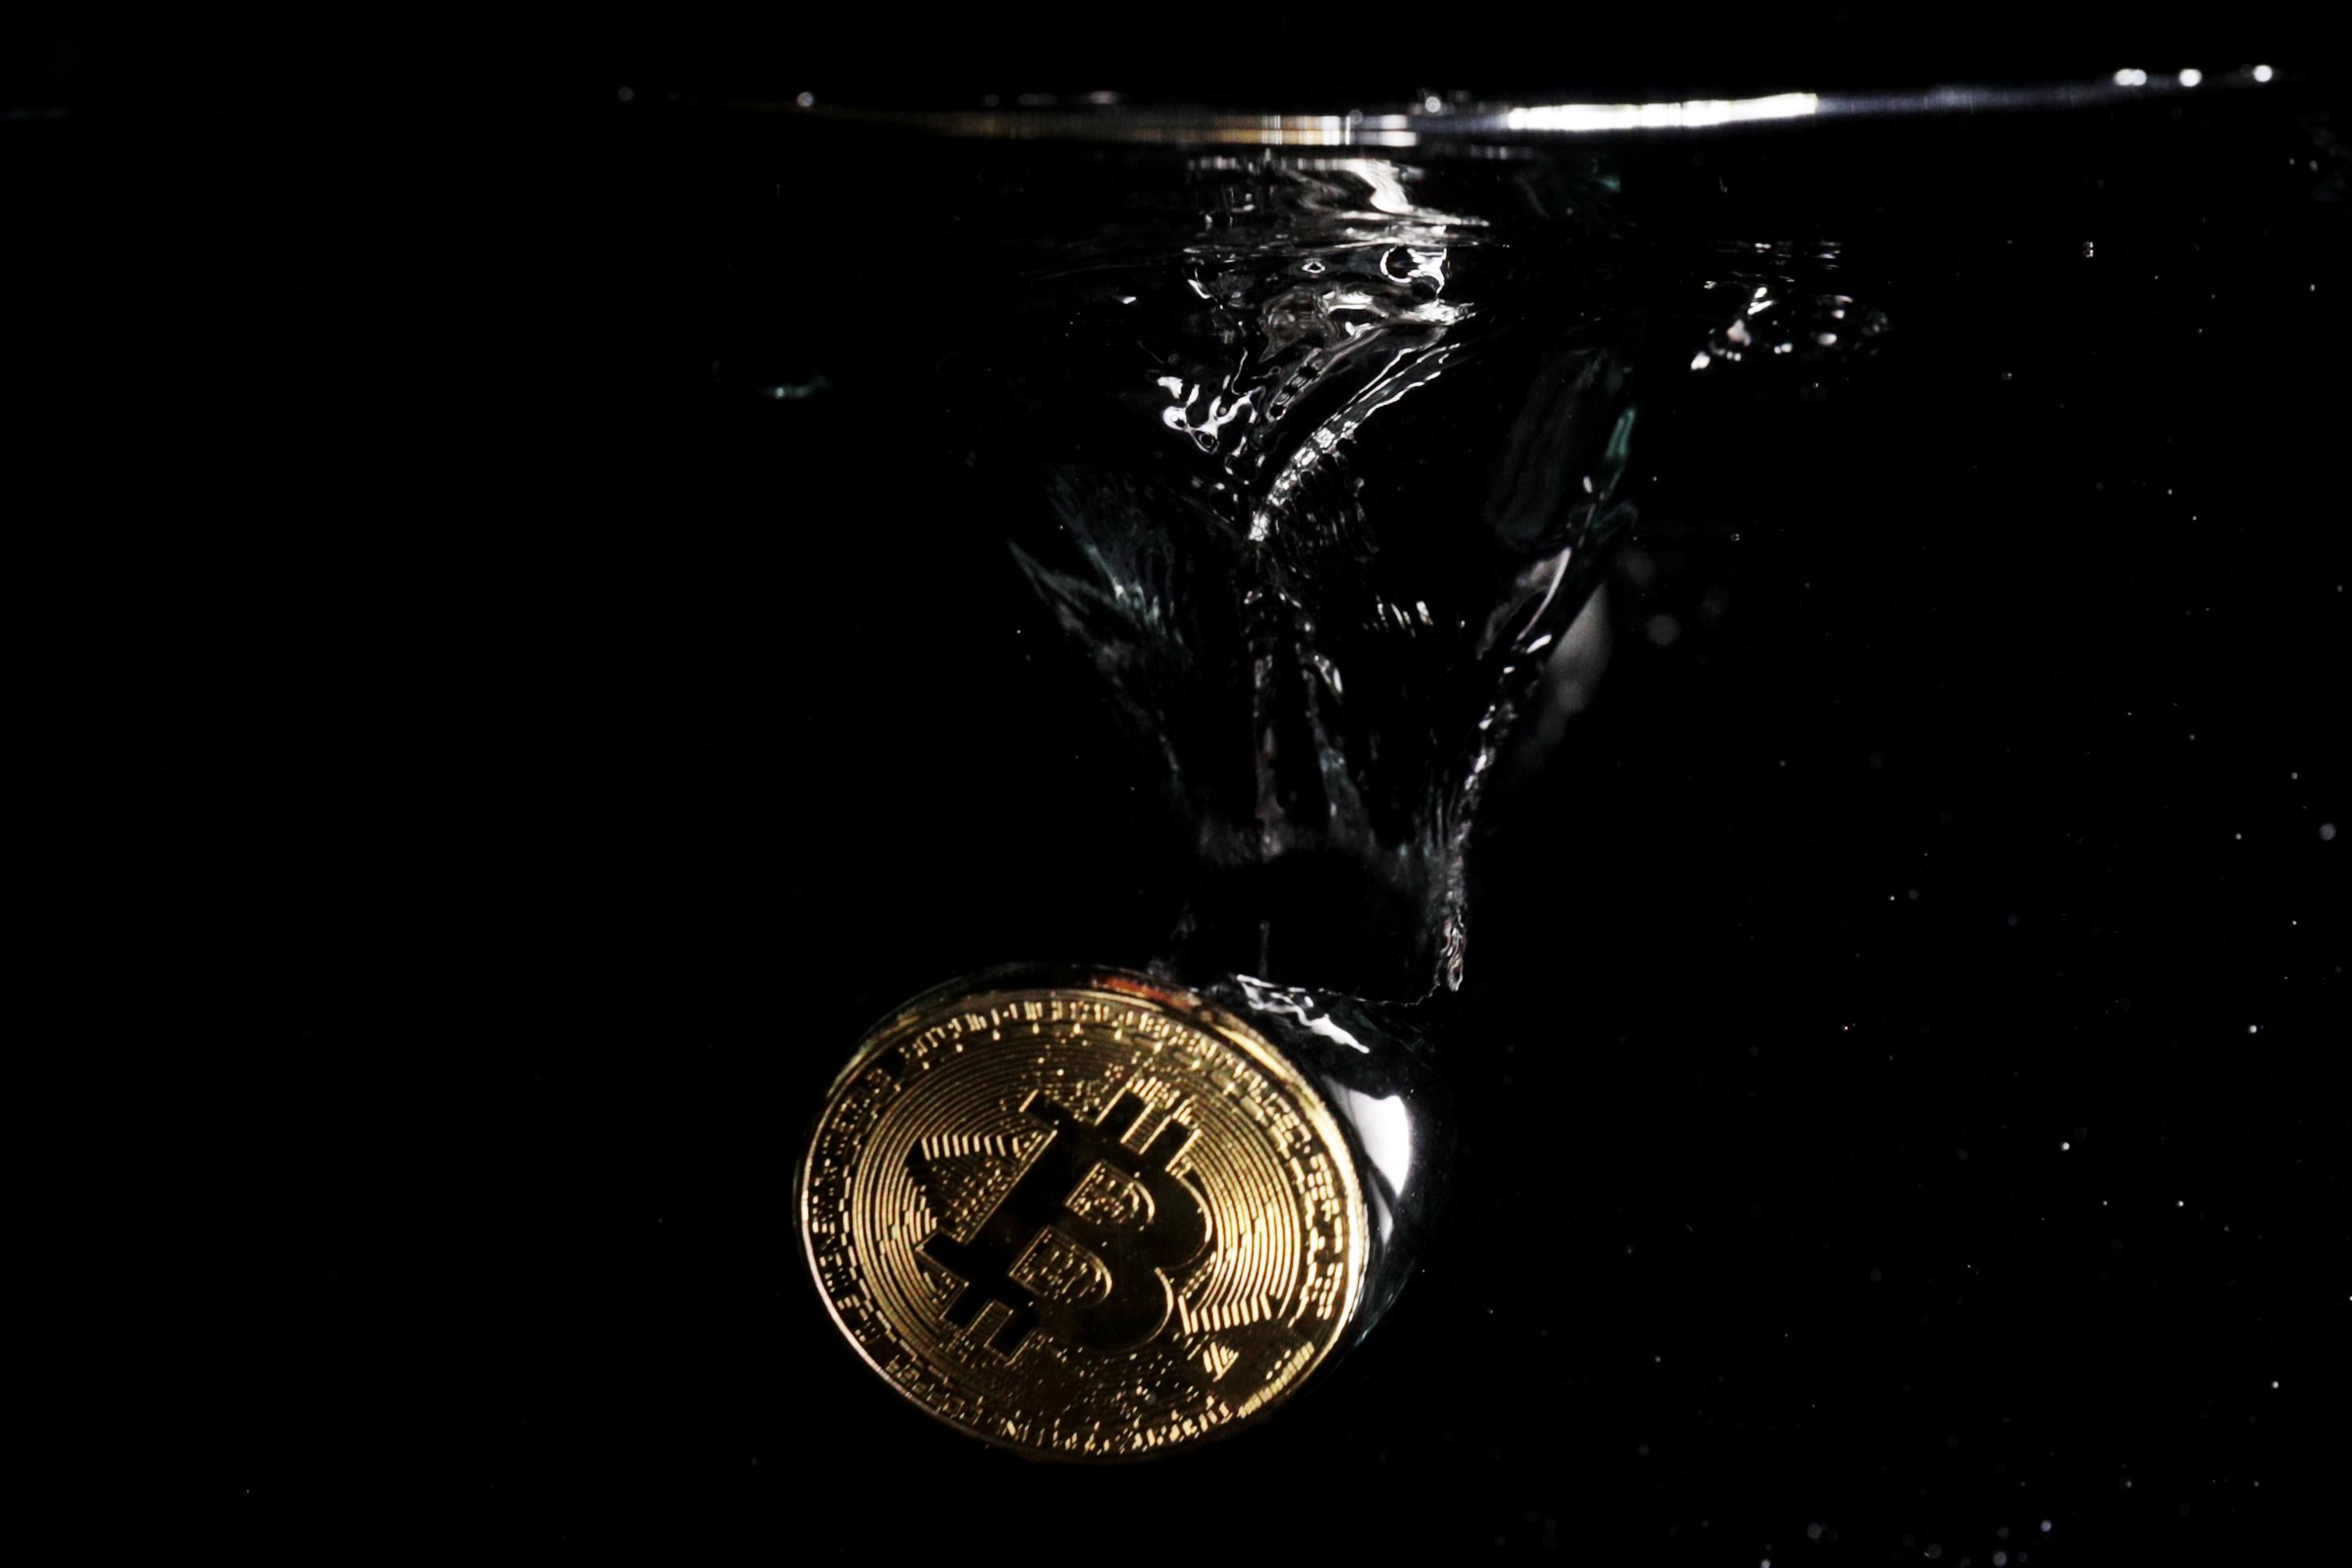 A bitcoin symbol submerged in water.